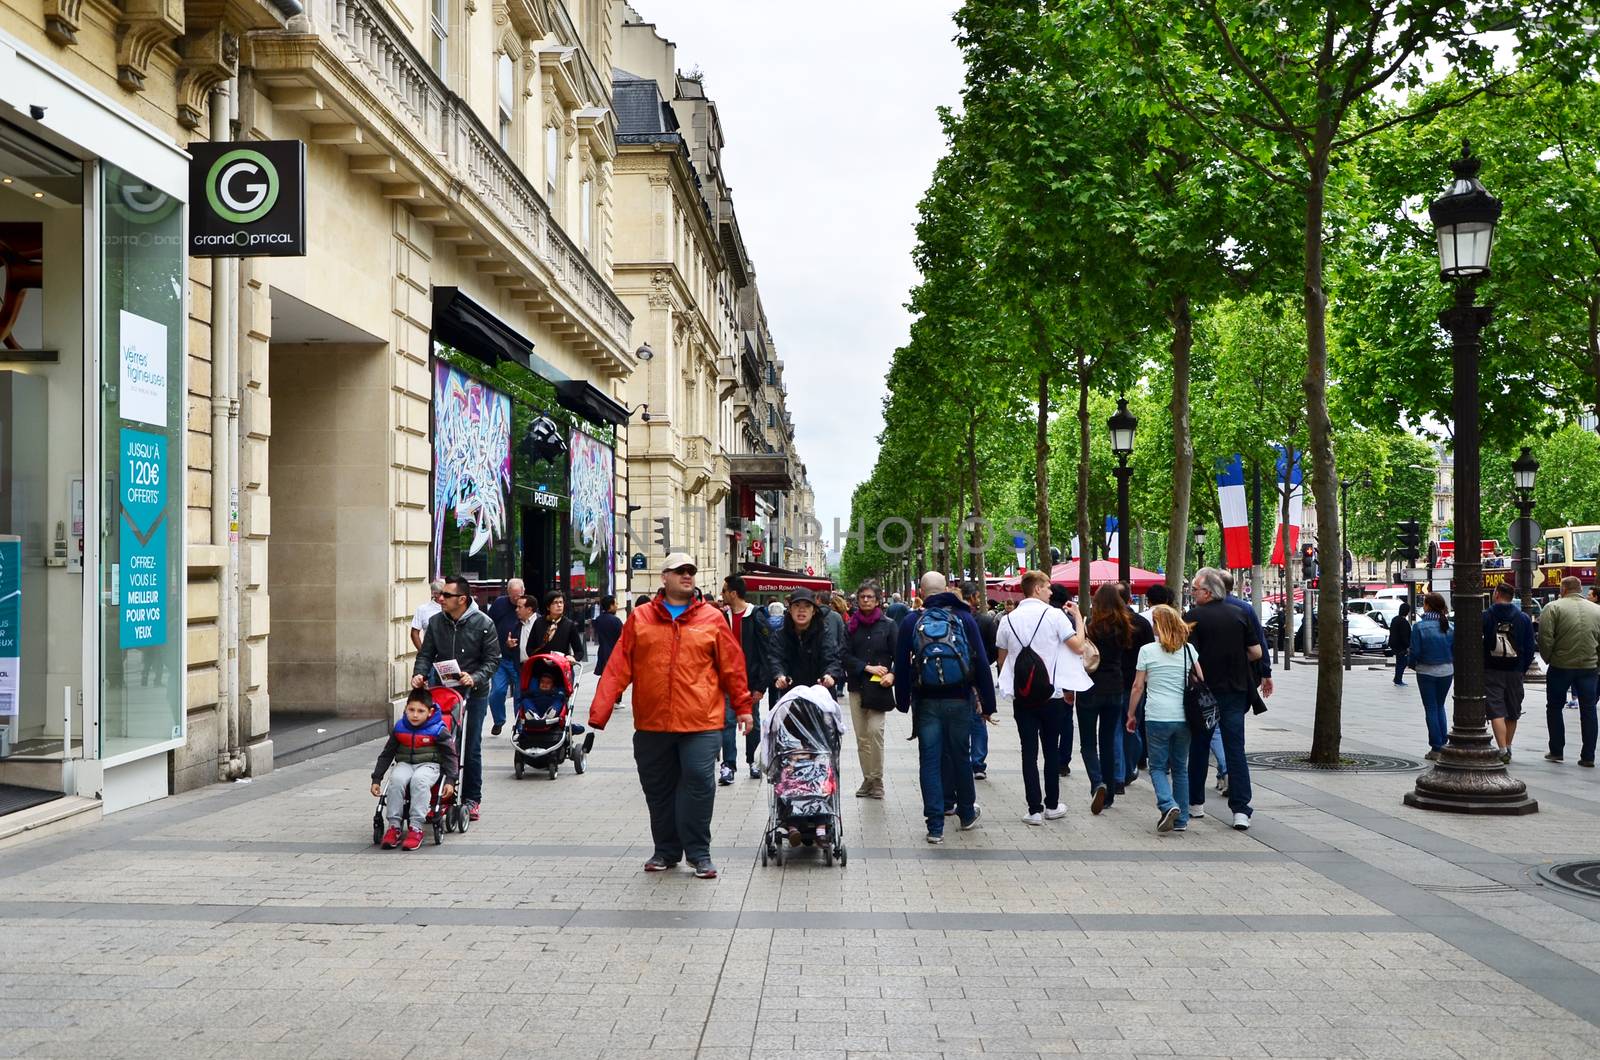 Paris, France - May 14, 2015: Local and tourists on the Avenue des Champs-elysees on May 14, 2015.The Avenue is one of the most famous streets in the world for upscale shopping.